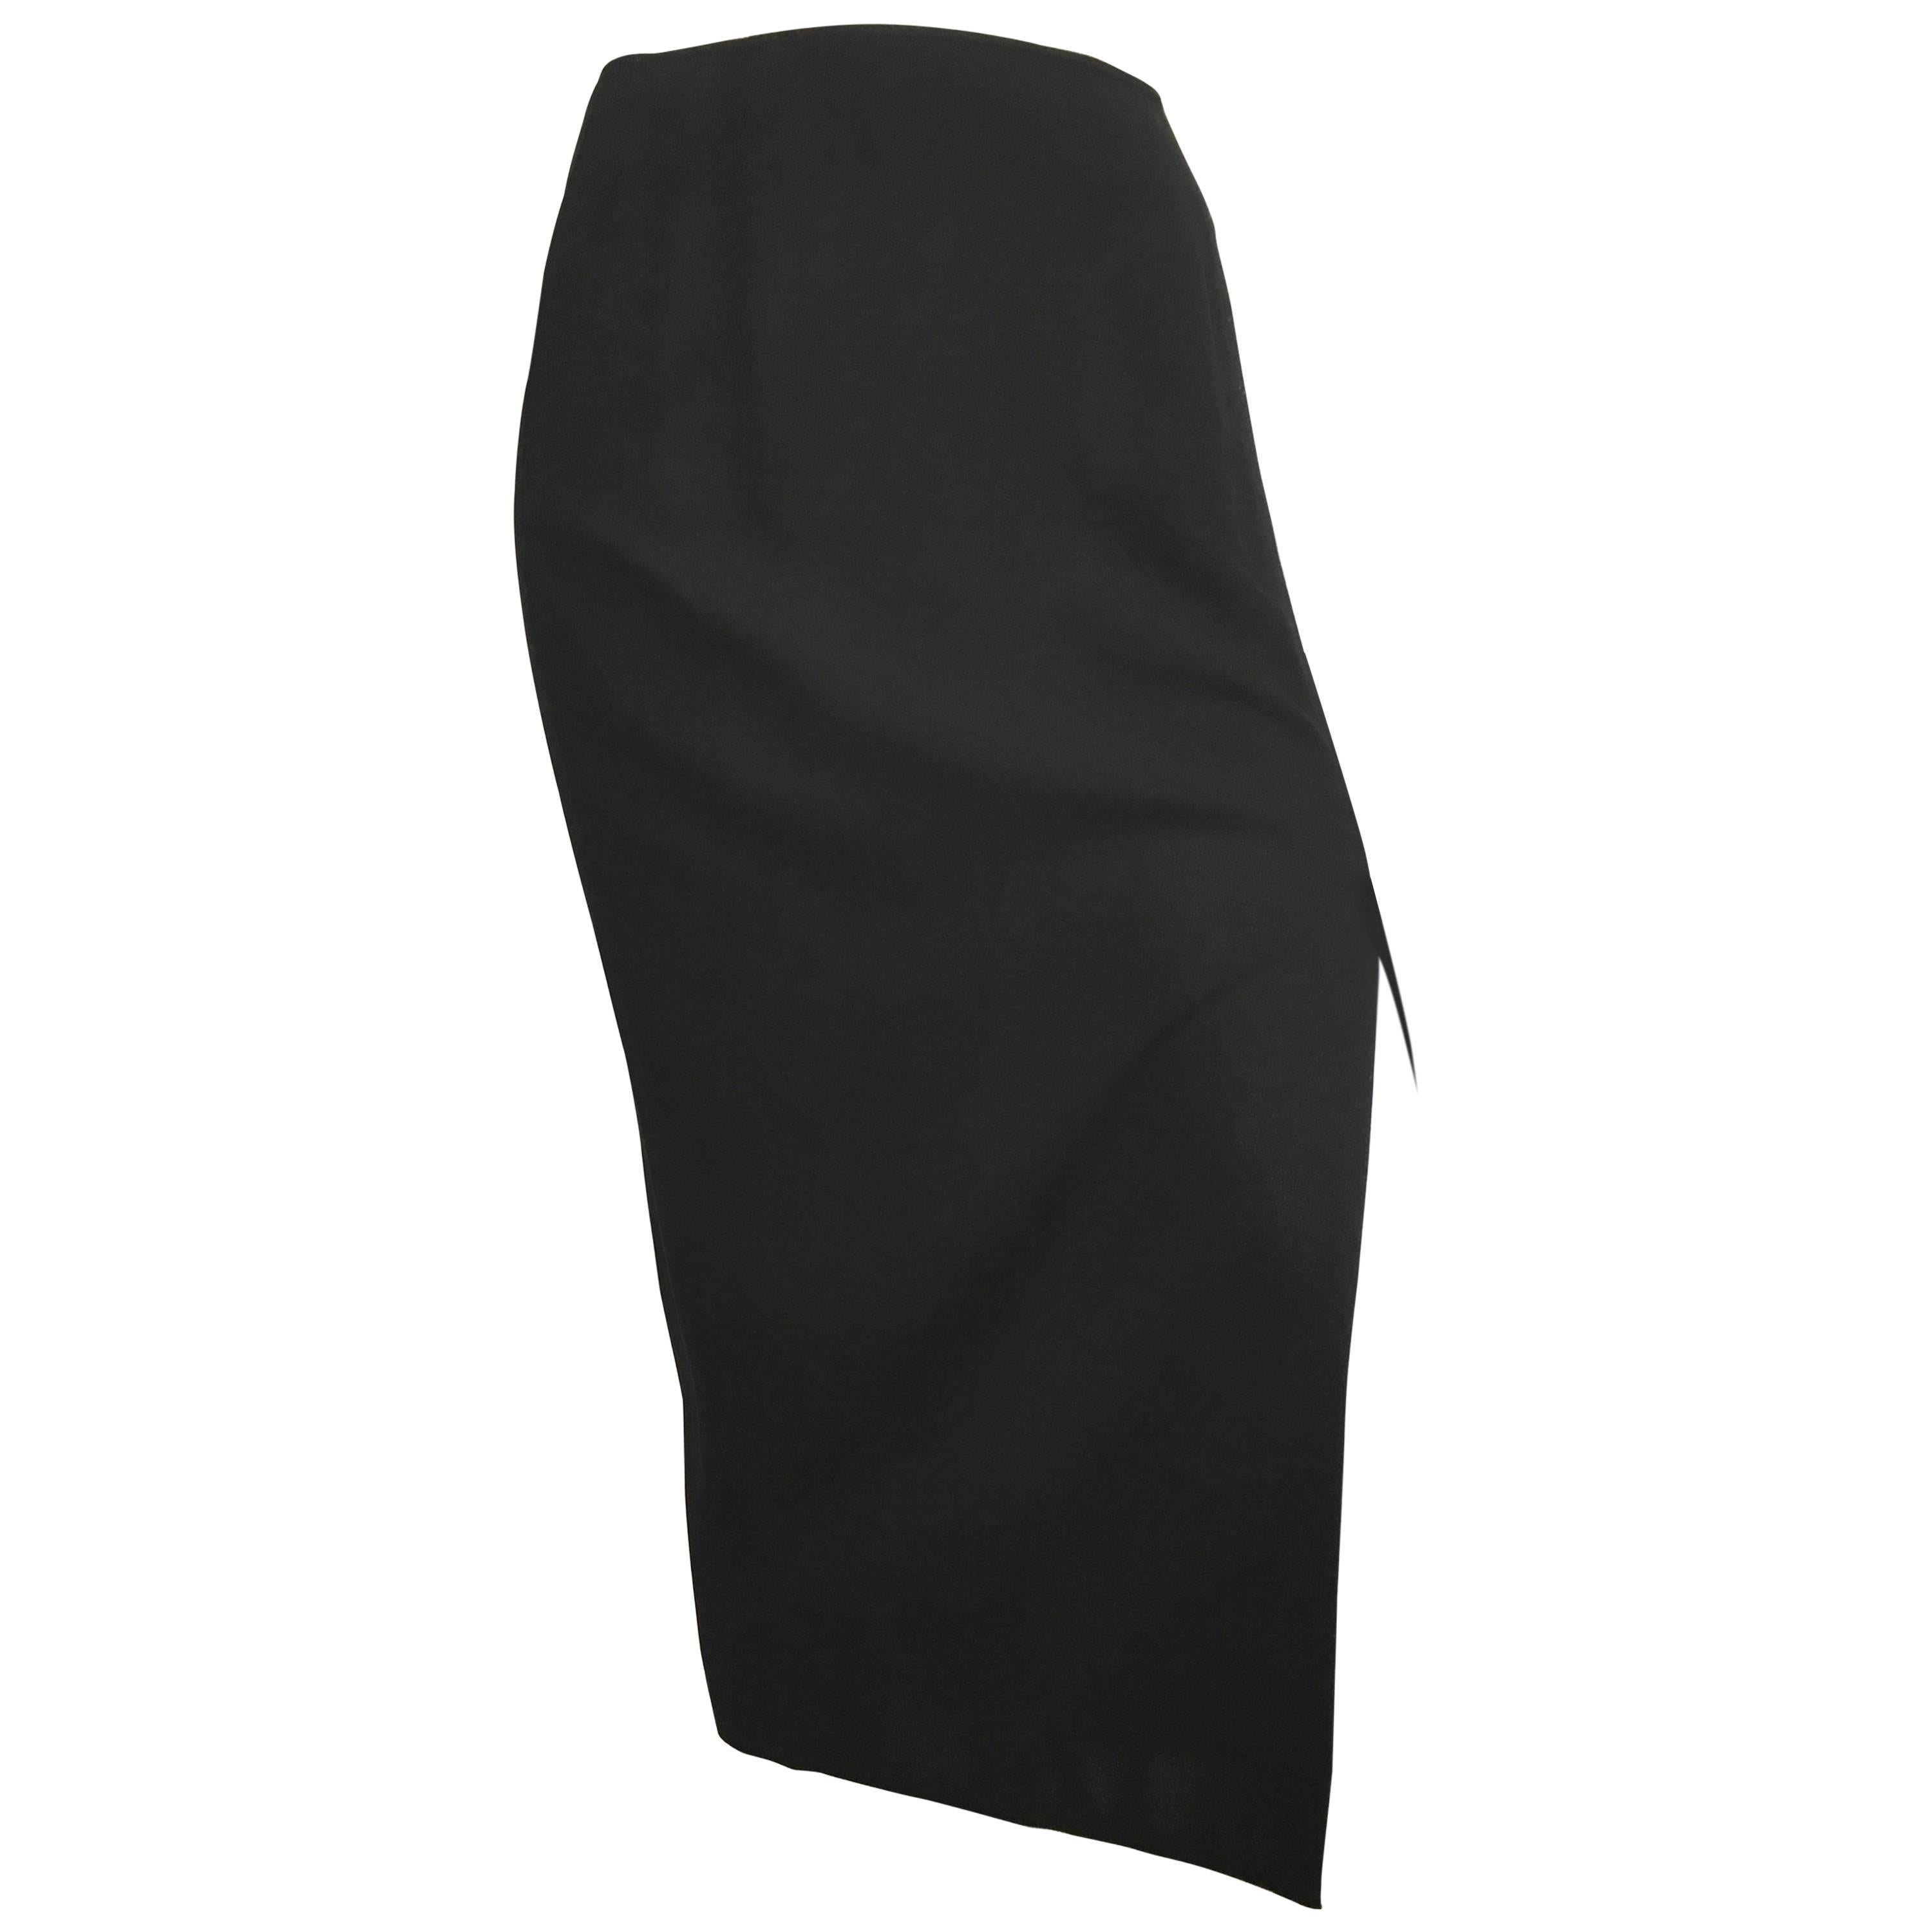 Donna Karan 1990s Black Wool Long Skirt Made in Italy Size 6. For Sale